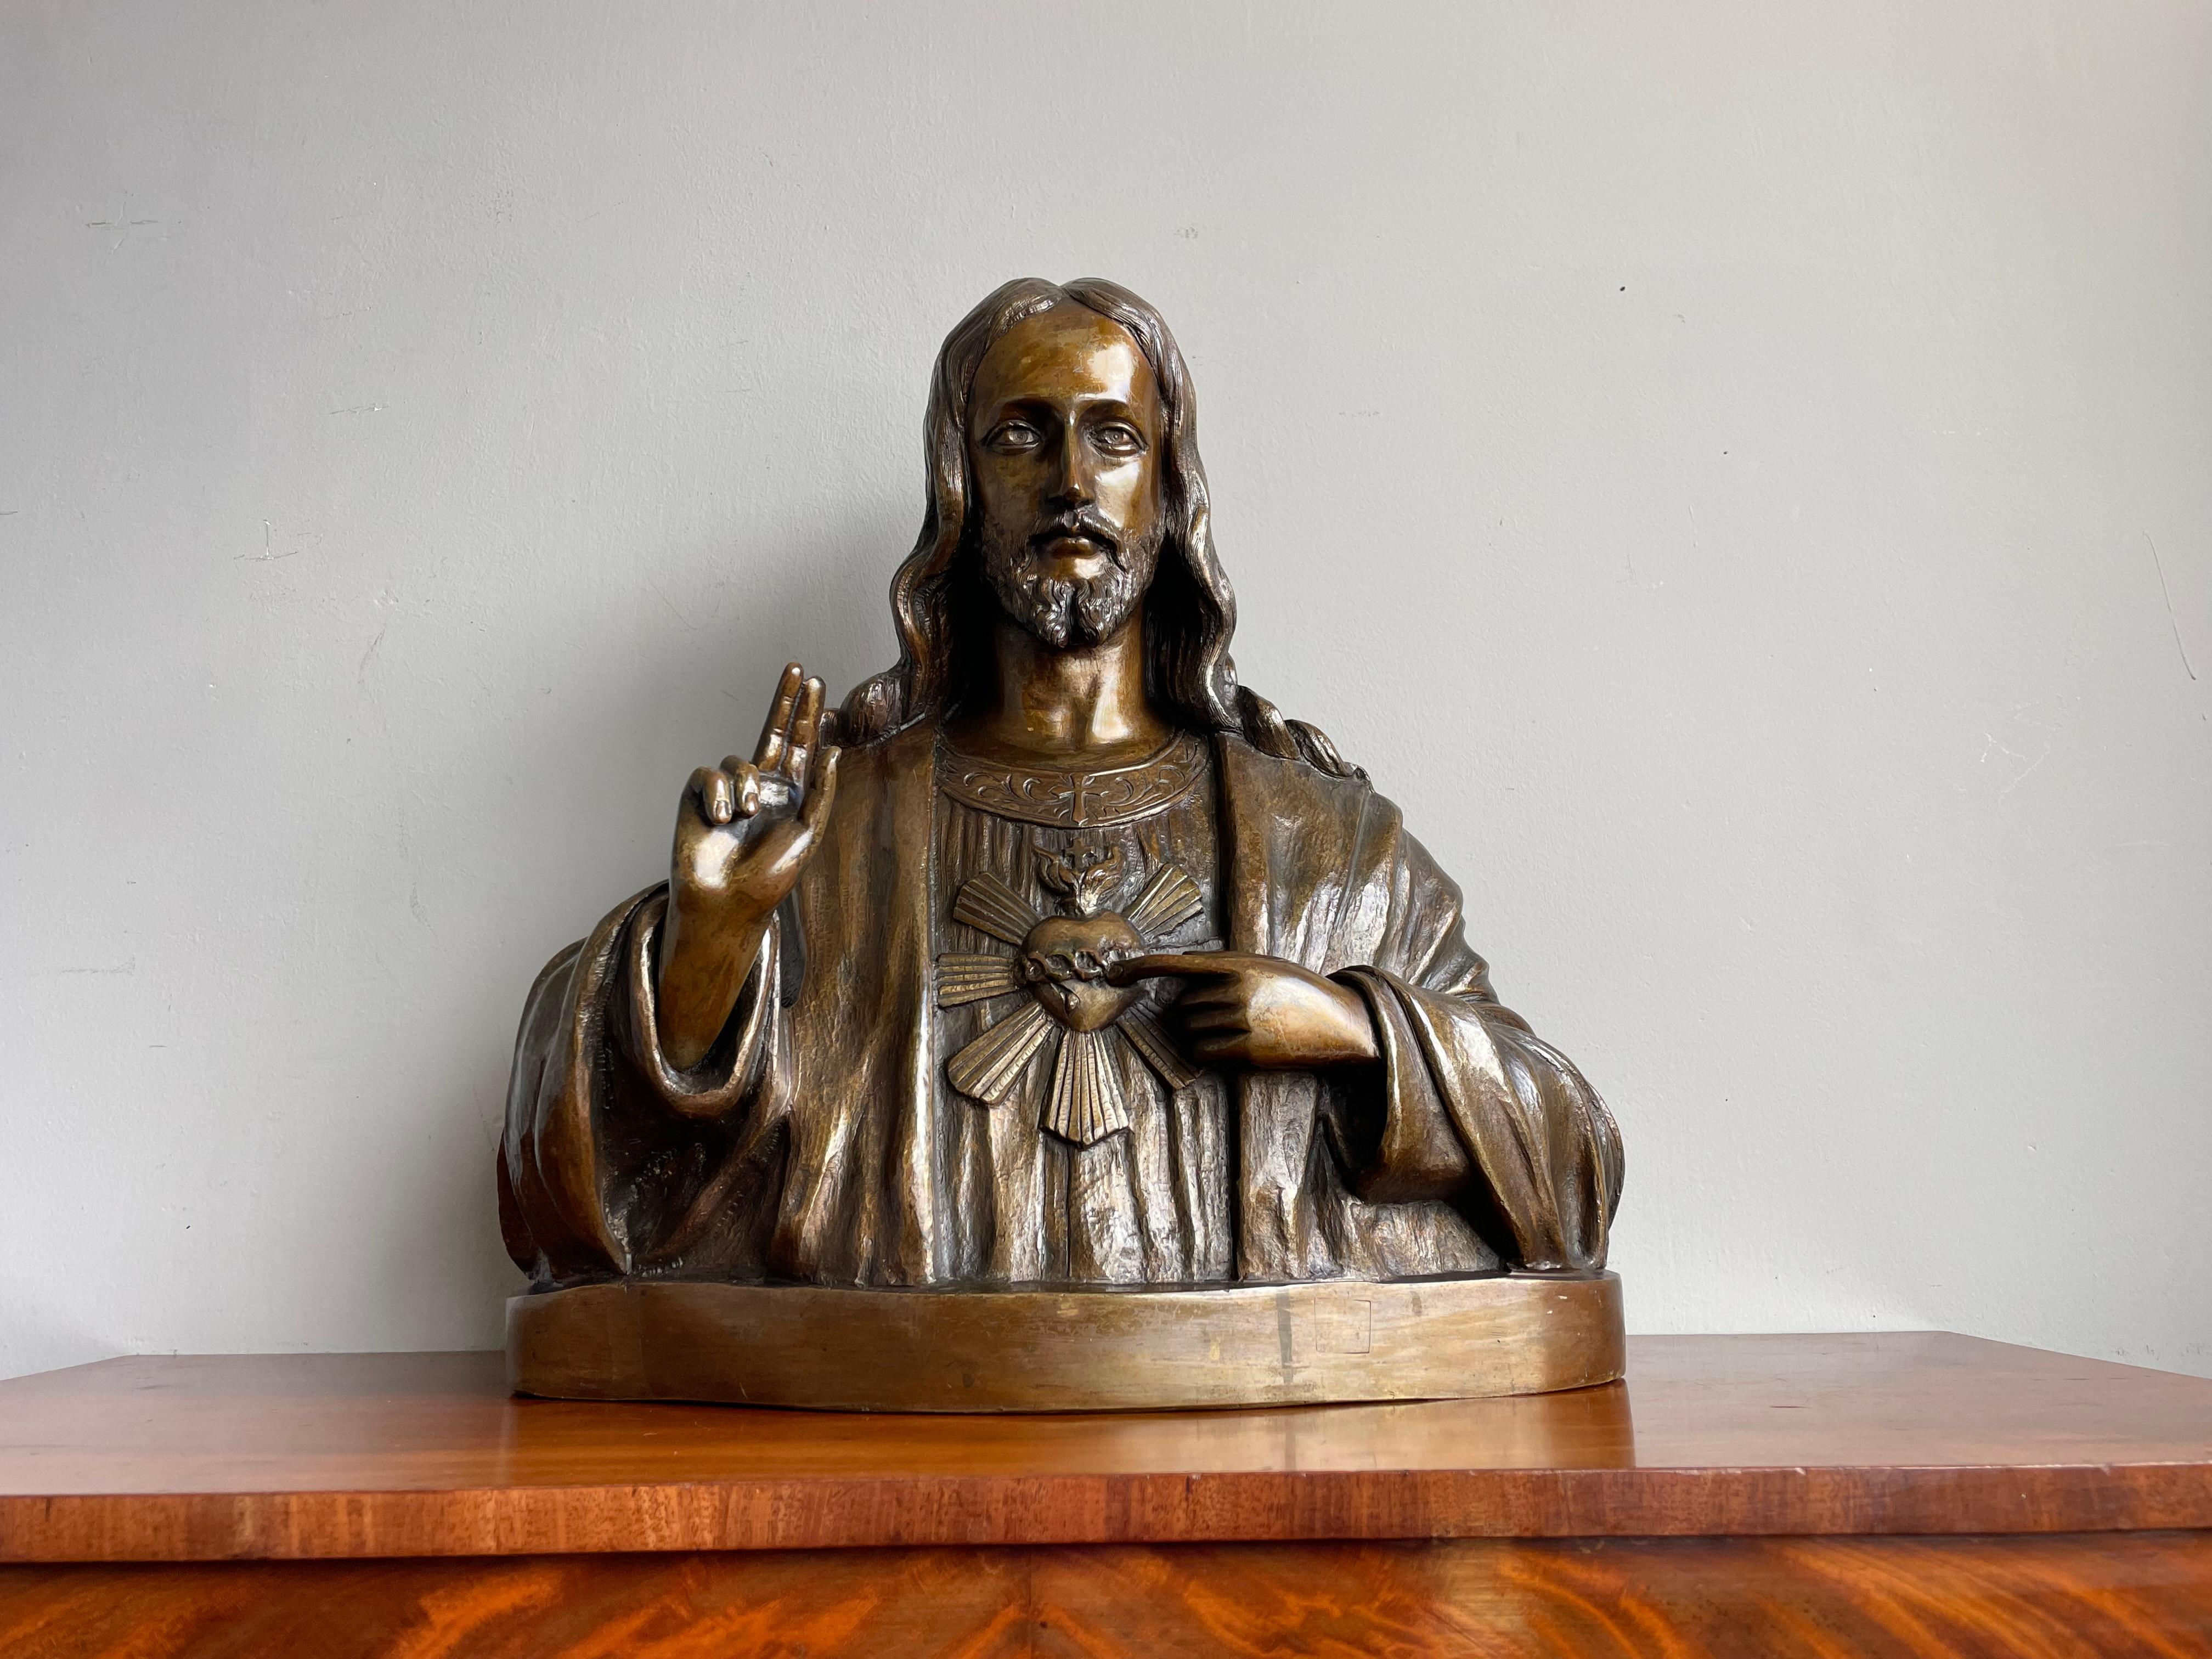 Rare Antique Bronze Holy Heart Sculpture / Bust of Our Lord Jesus Christ 1920 For Sale 4